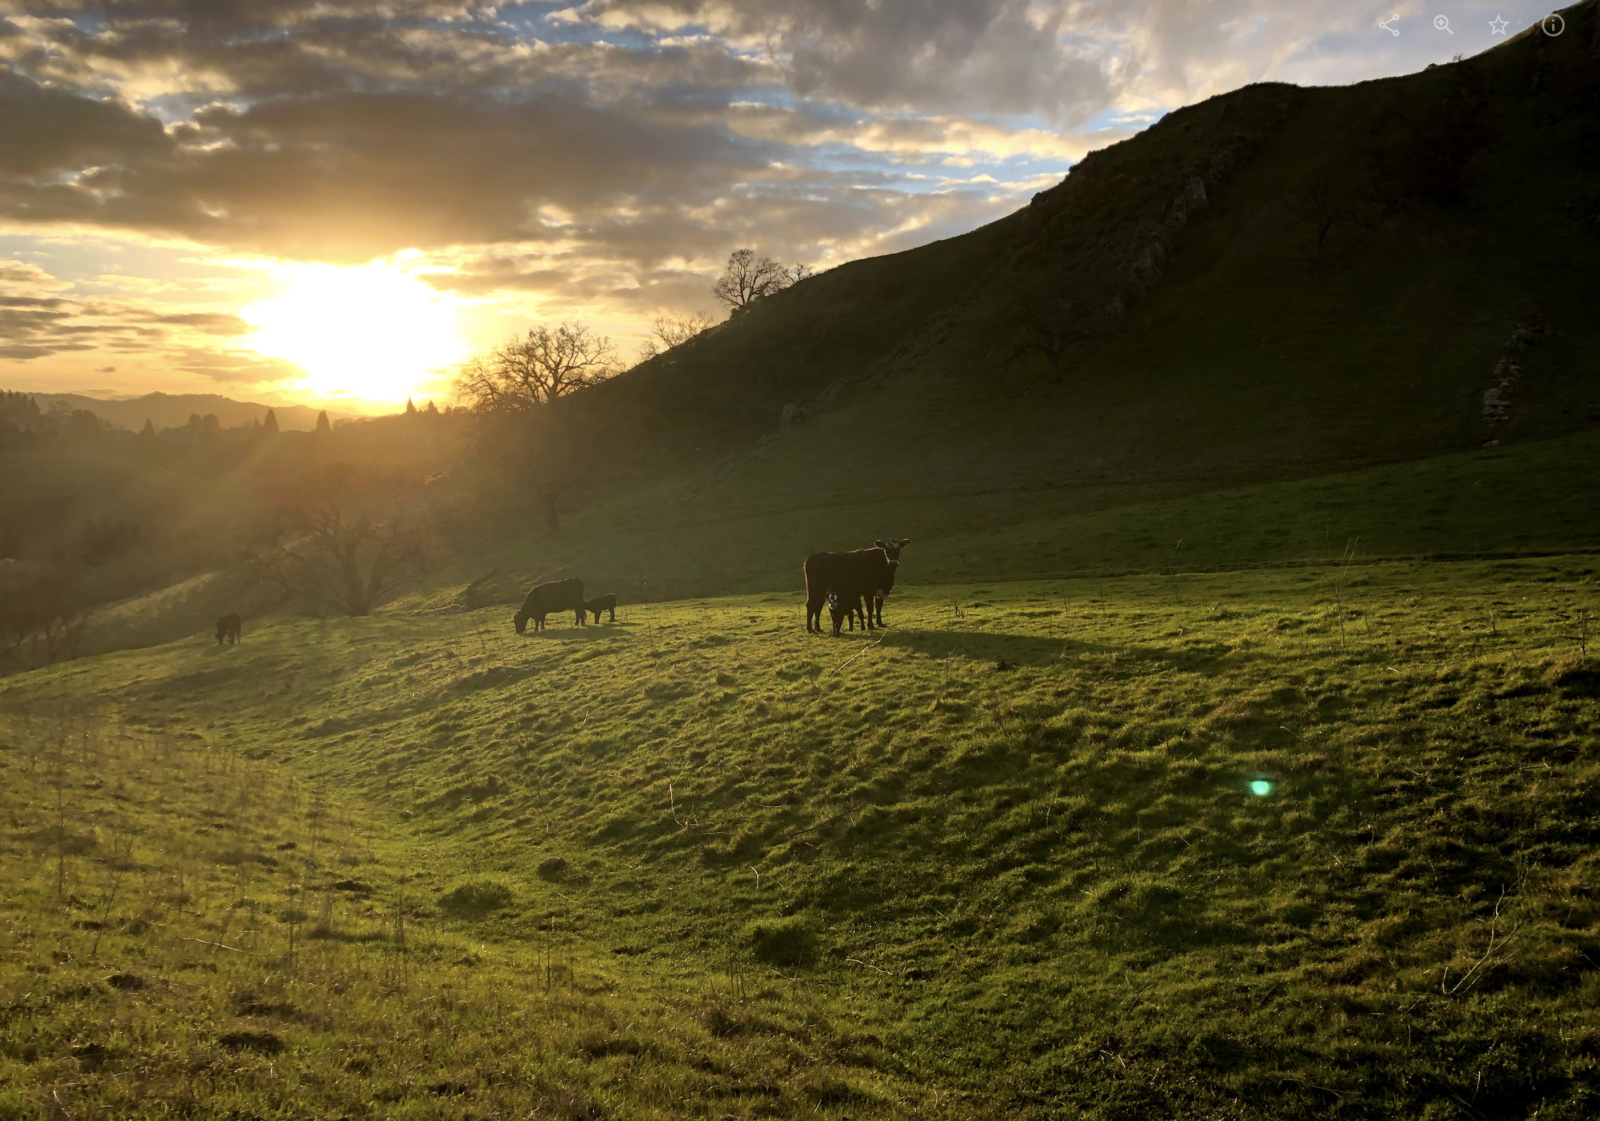 Black cattle in a green field beside hills at sunset.